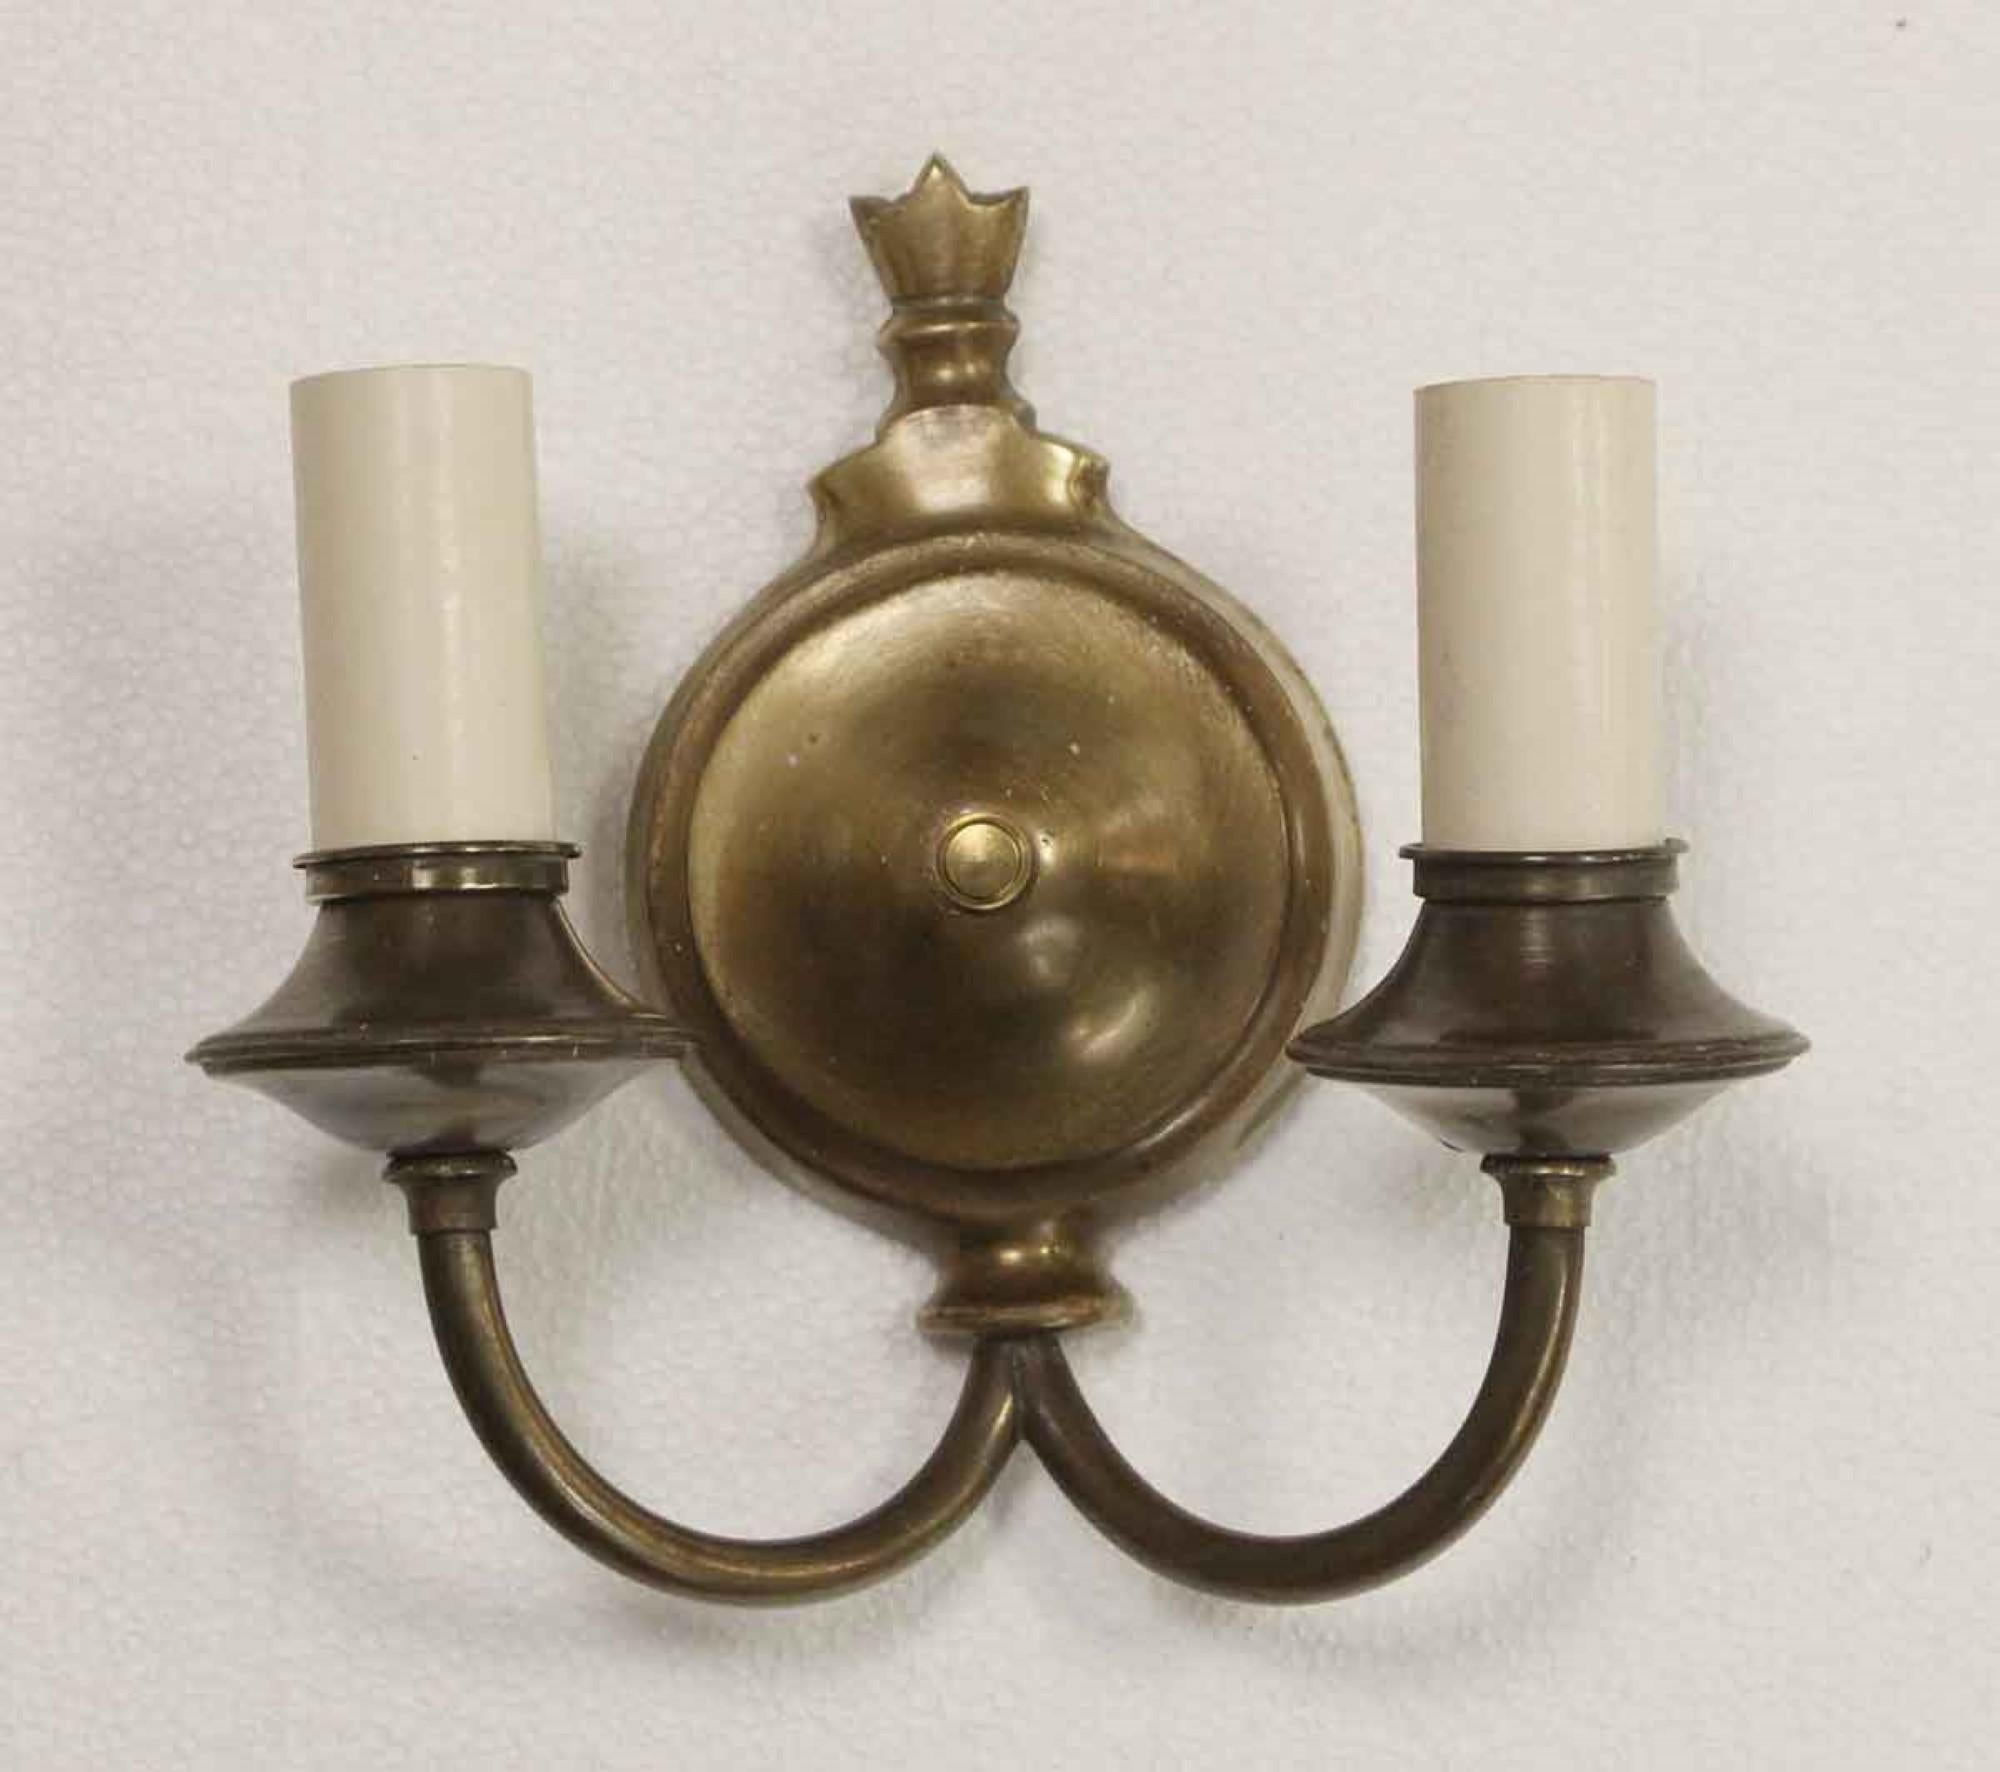 1920s pair of Colonial style two-arm sconces in brass with an antique brass patina with short candlesticks. Small quantity available at time of posting. Priced each. This can be seen at our 400 Gilligan St location in Scranton. PA.